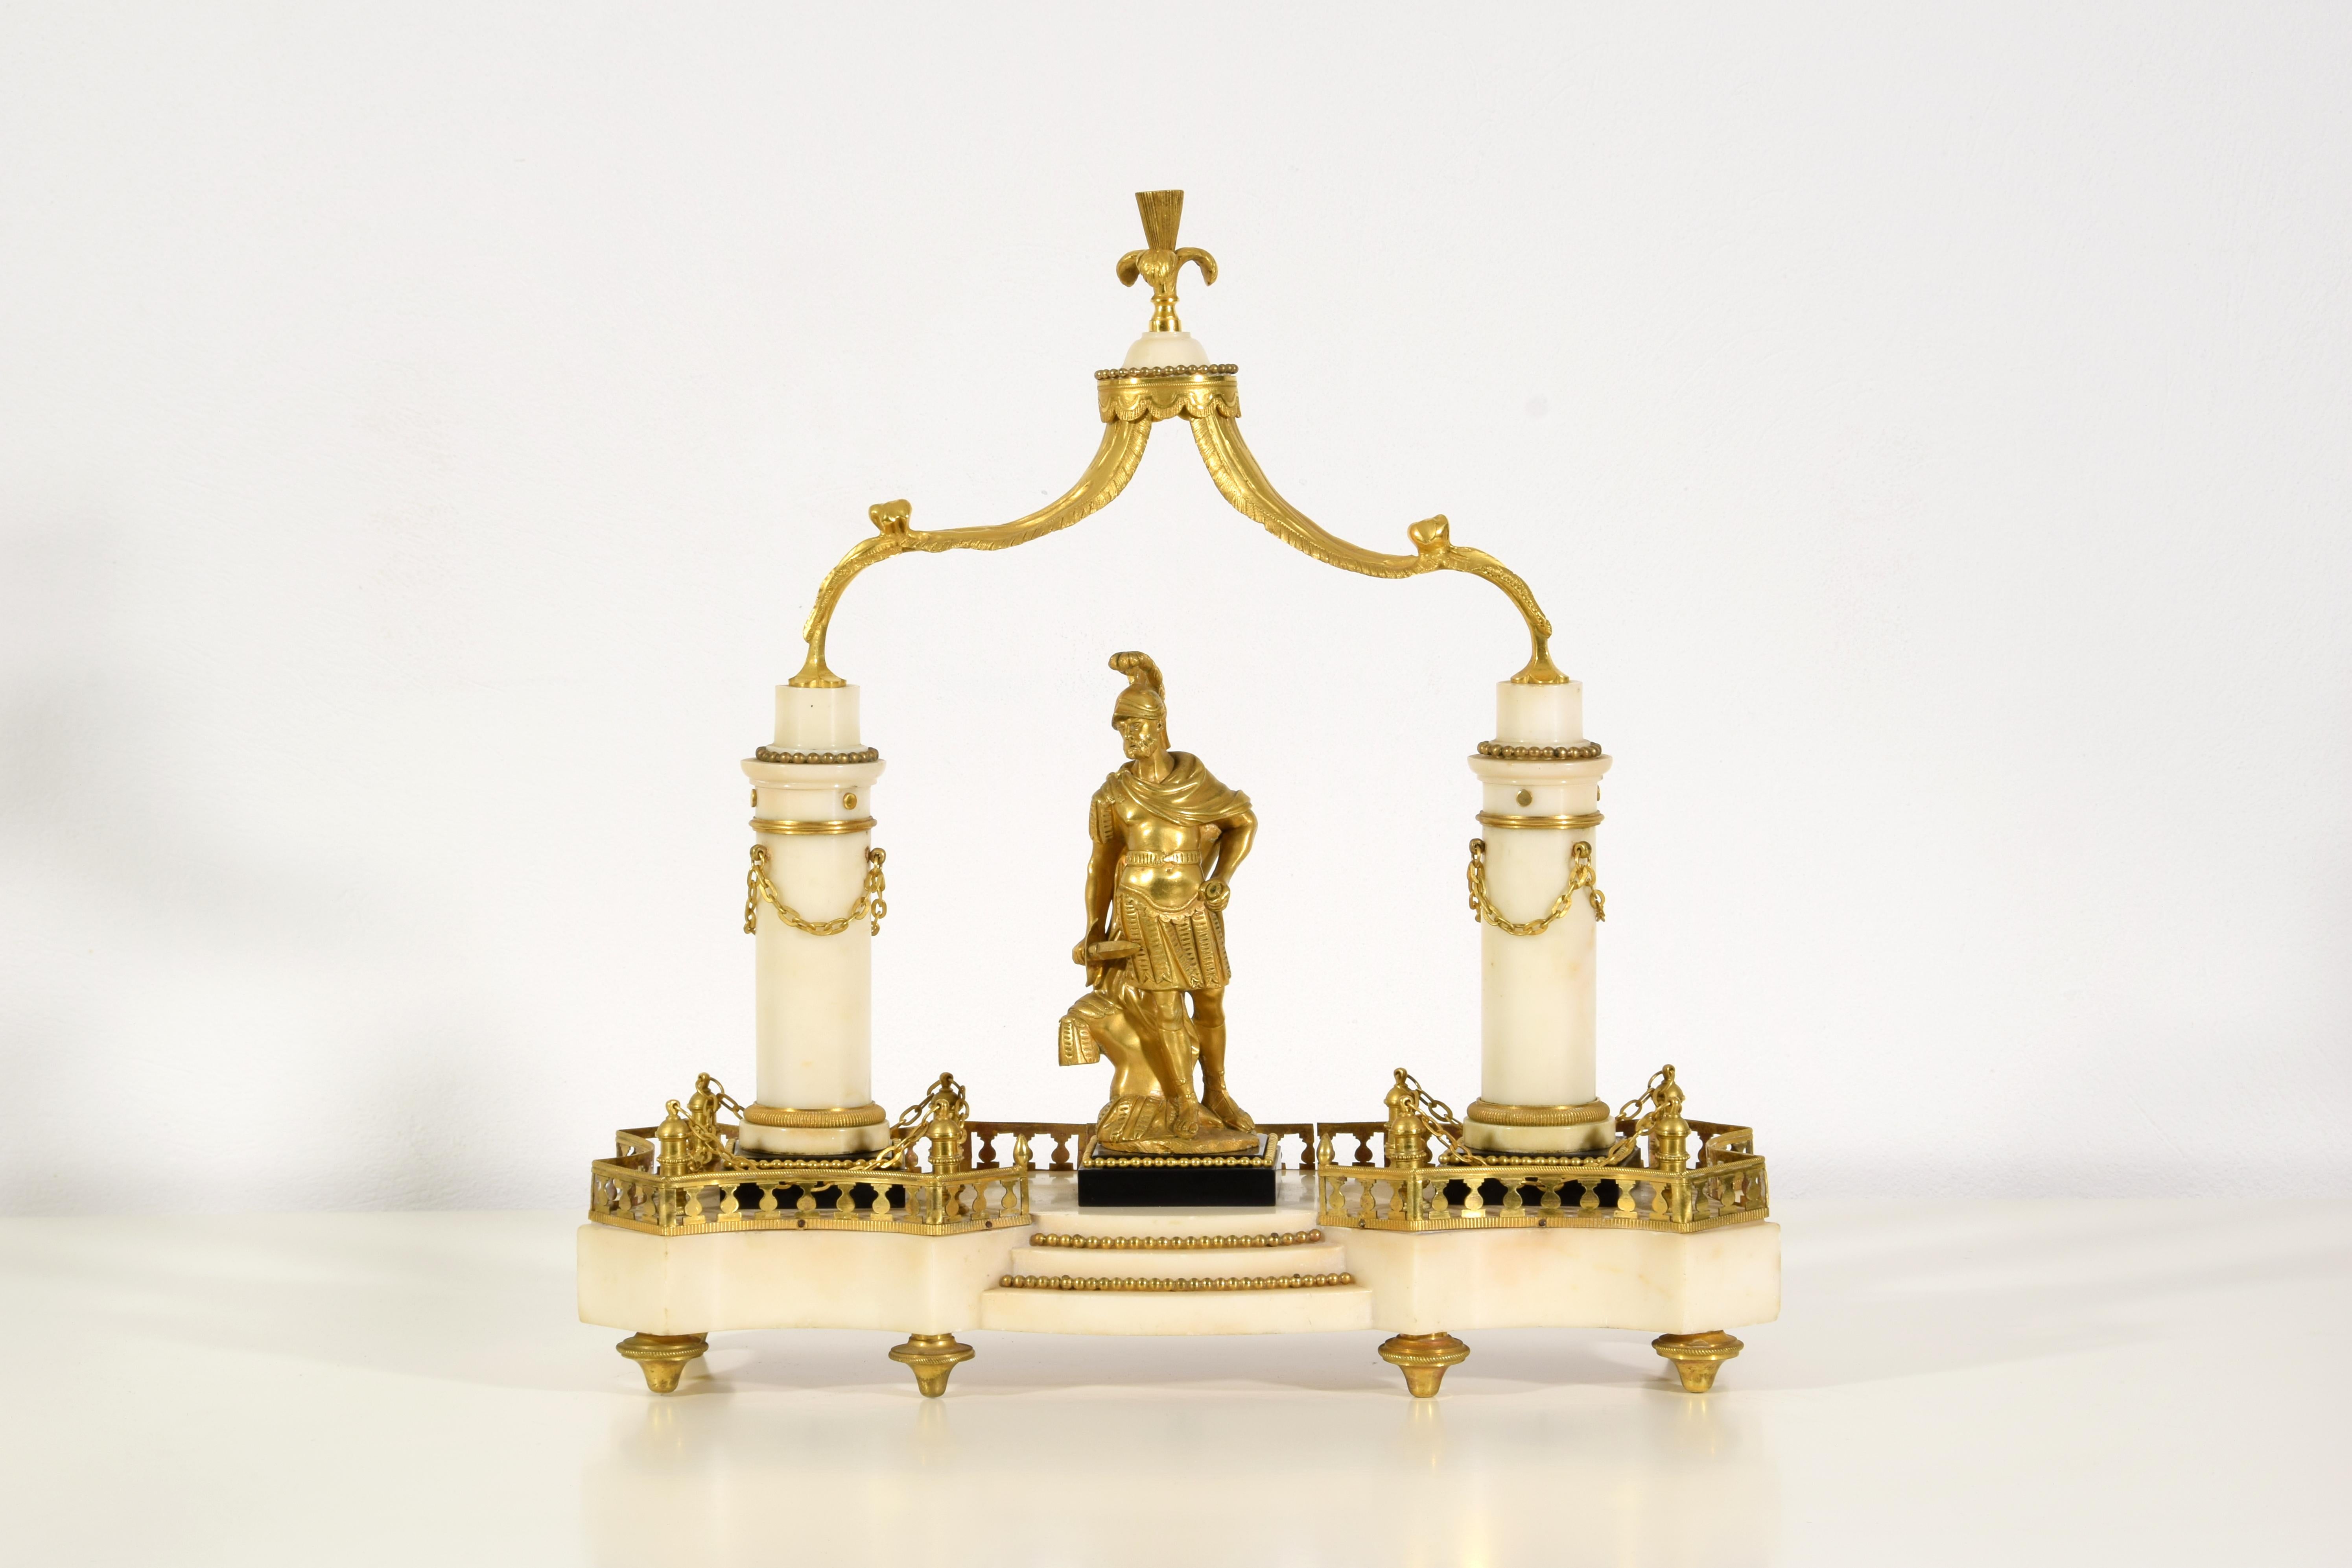 19th Century, French Marble and Gilt Bronze Centerpiece
This particular centerpiece was made, in white marble and finely chiseled gilded bronze, in France between the end of the eighteenth century and the beginning of the nineteenth century.
The